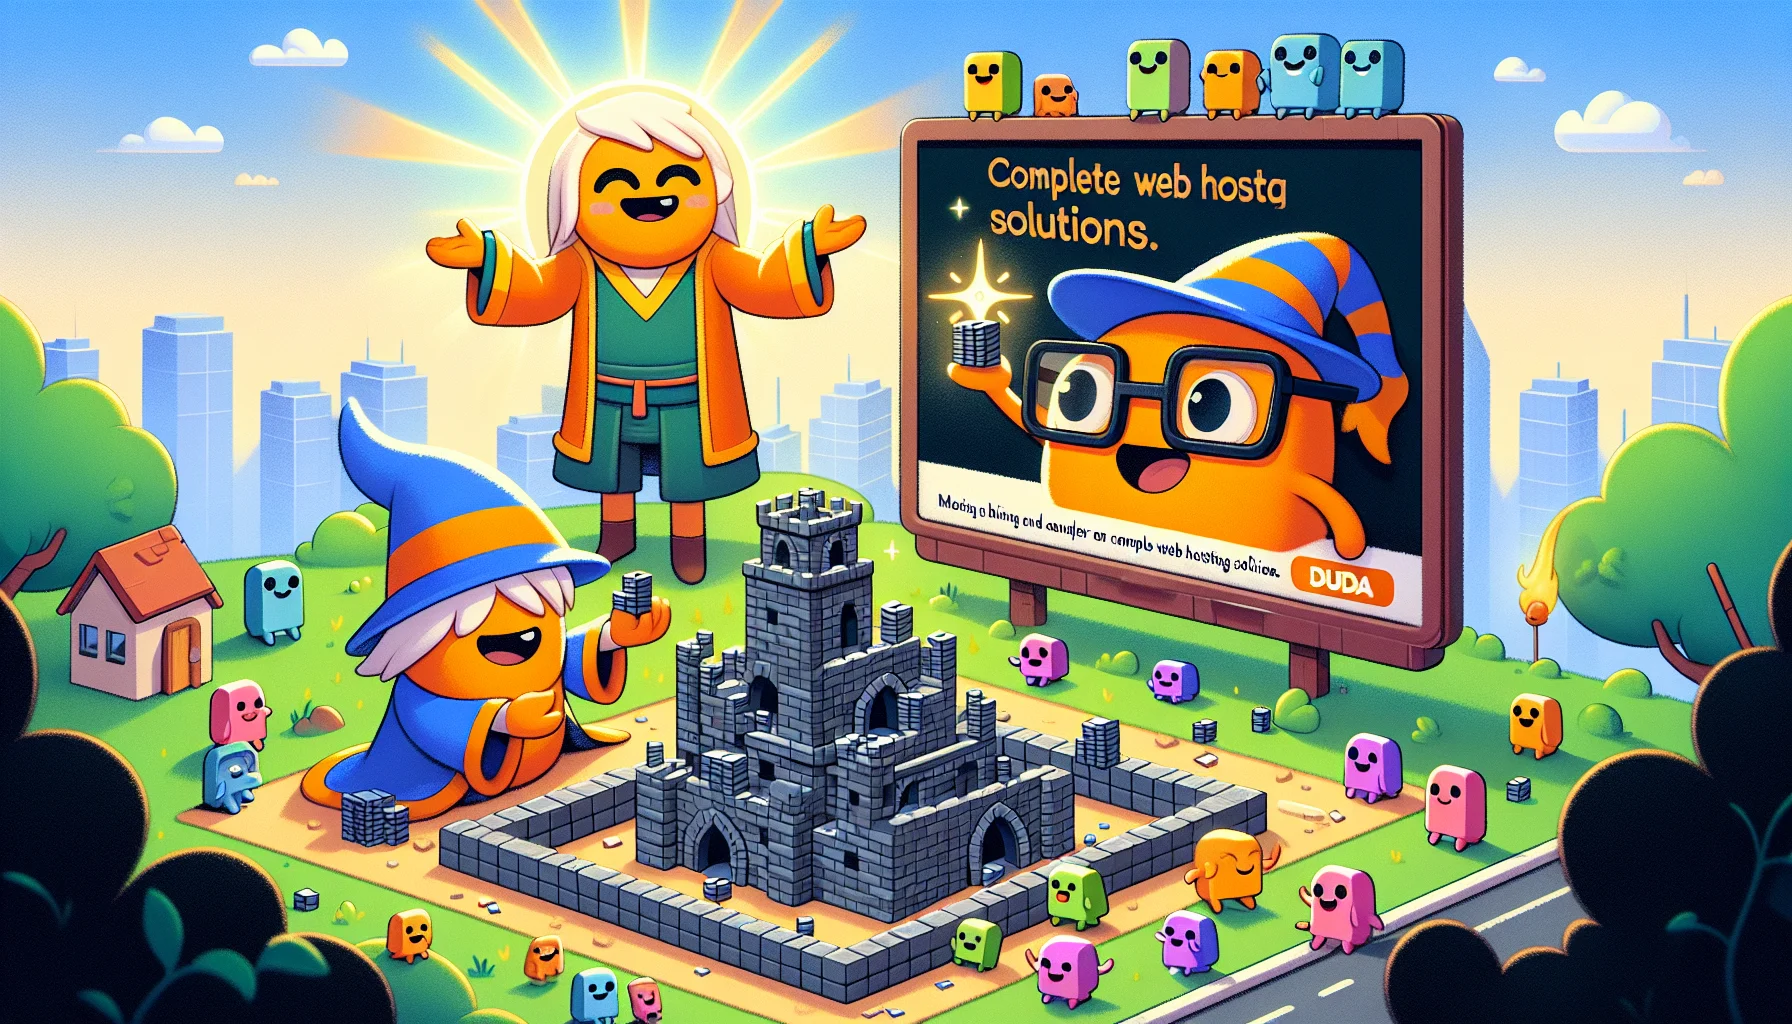 Imagine a comedic scenario involving an unbranded website builder similar to Duda. Picture this: A friendly orange cartoon character, wearing glasses and a sweeping wizard's hat, is enthusiastically constructing a digital castle. Beside it, there's a billboard displaying text about complete web hosting solutions. The scene is teeming with adorable, colorful pixelated creatures who are helping with the building process, carrying minute squares (pixels) and arranging them to form the castle. Meanwhile, a digital sun brightly shines in the background, symbolizing a promising future for anyone who uses the builder.